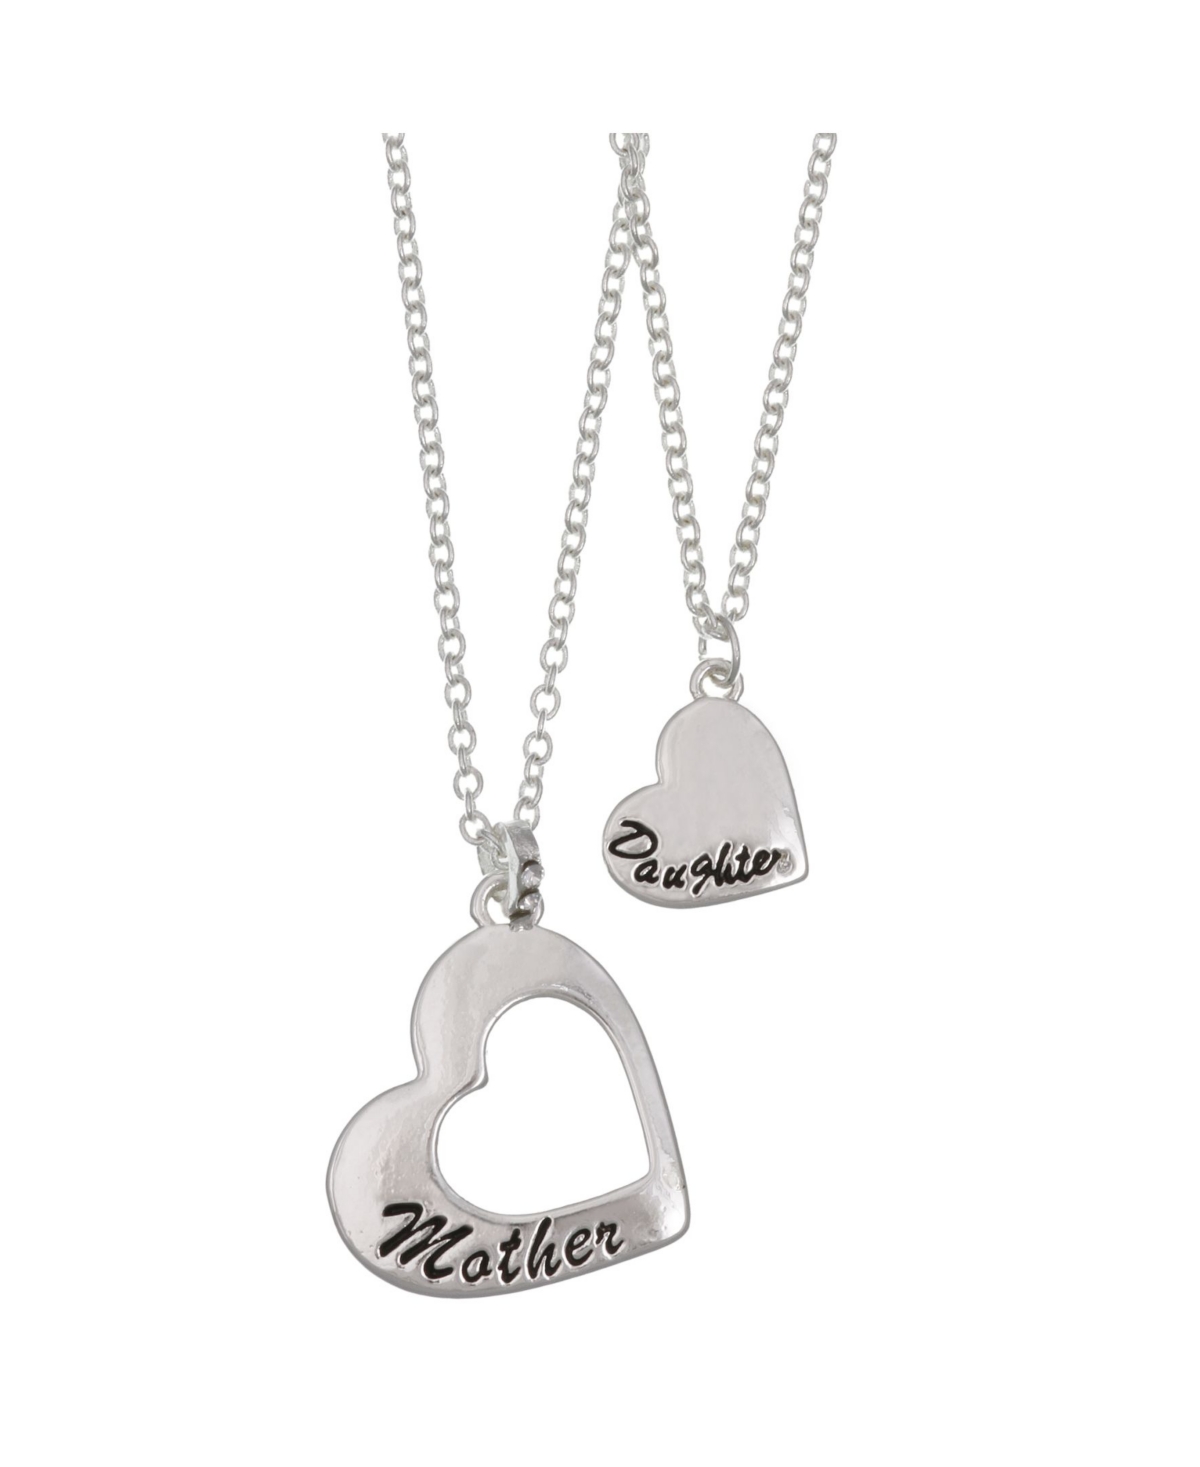 Fao Schwarz Mother and Daughter Silver Tone Heart Pendant Necklace Set, 2 Piece